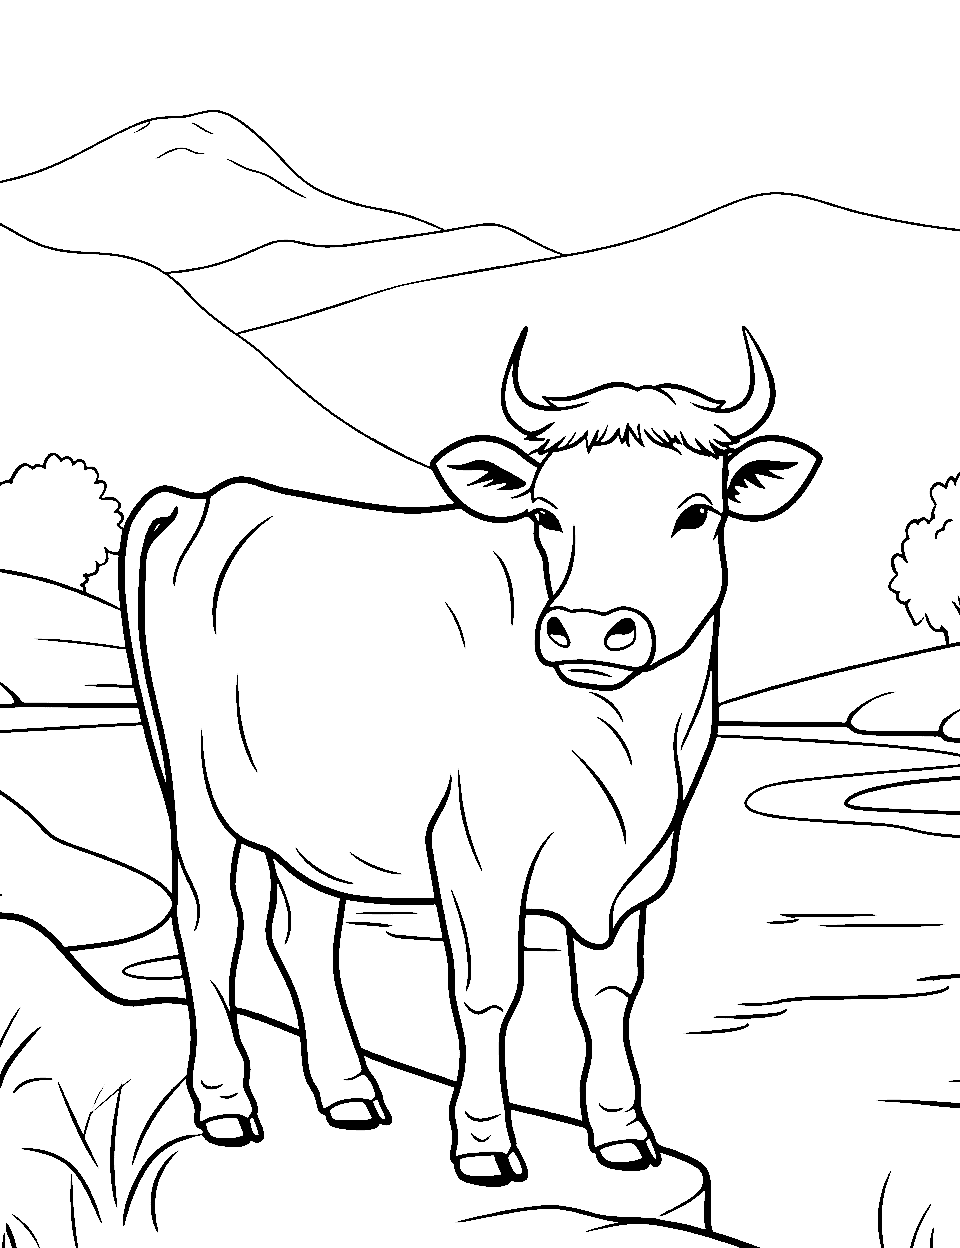 Calm Cow by the River Coloring Page - A peaceful cow grazing beside a simple, flowing river.